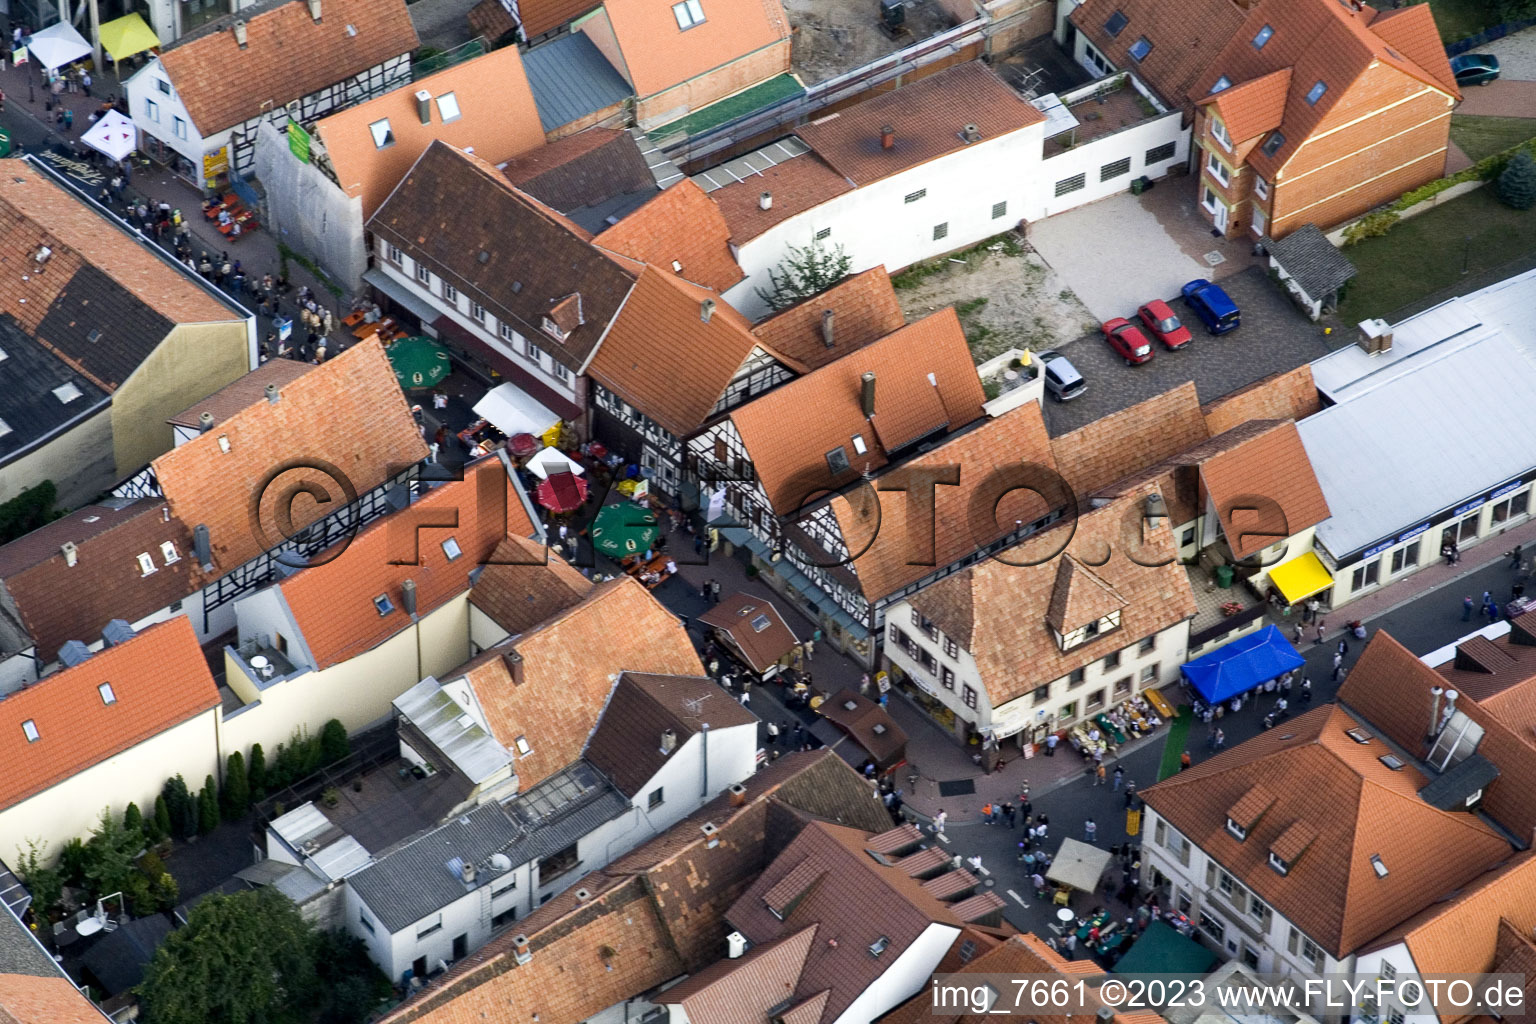 Aerial photograpy of City festival, Hauptstr in Kandel in the state Rhineland-Palatinate, Germany